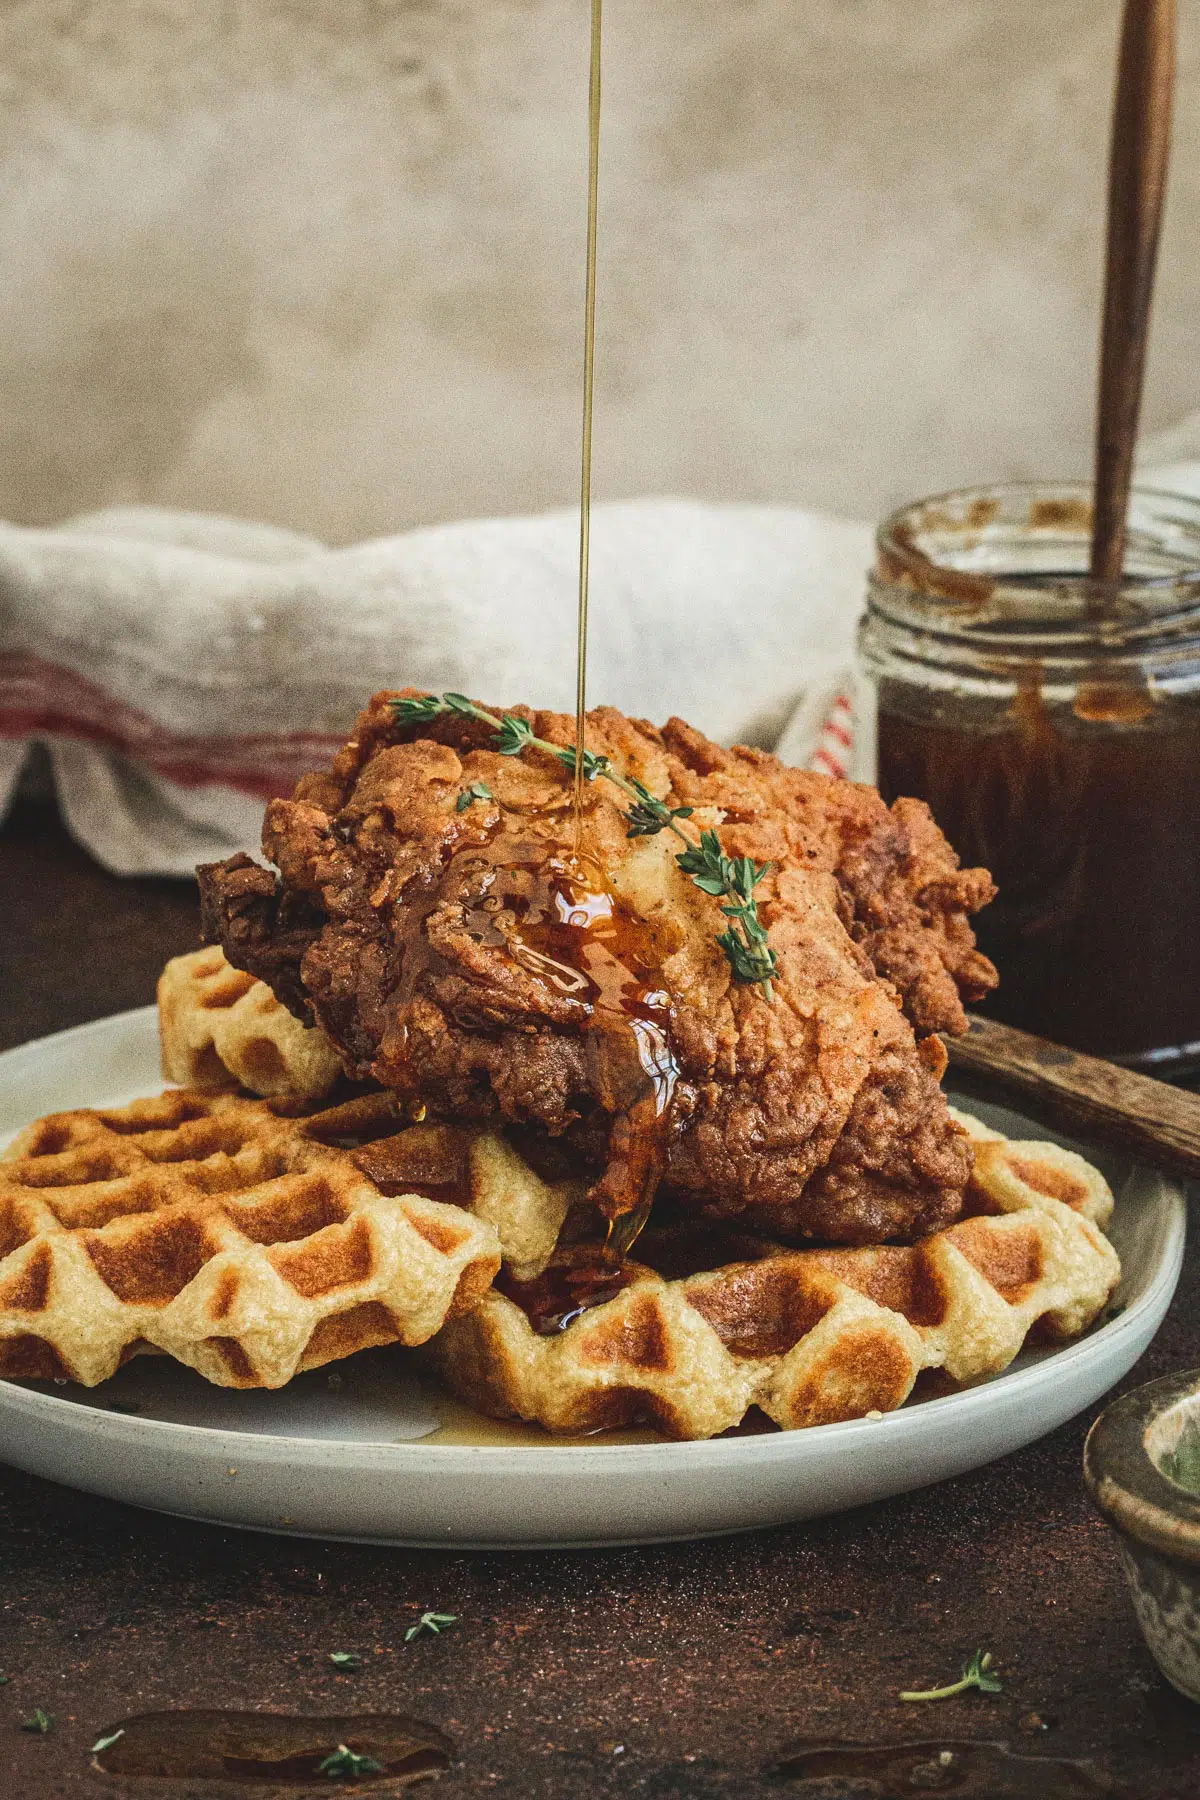 Syrup drizzling on fried chicken and waffles.